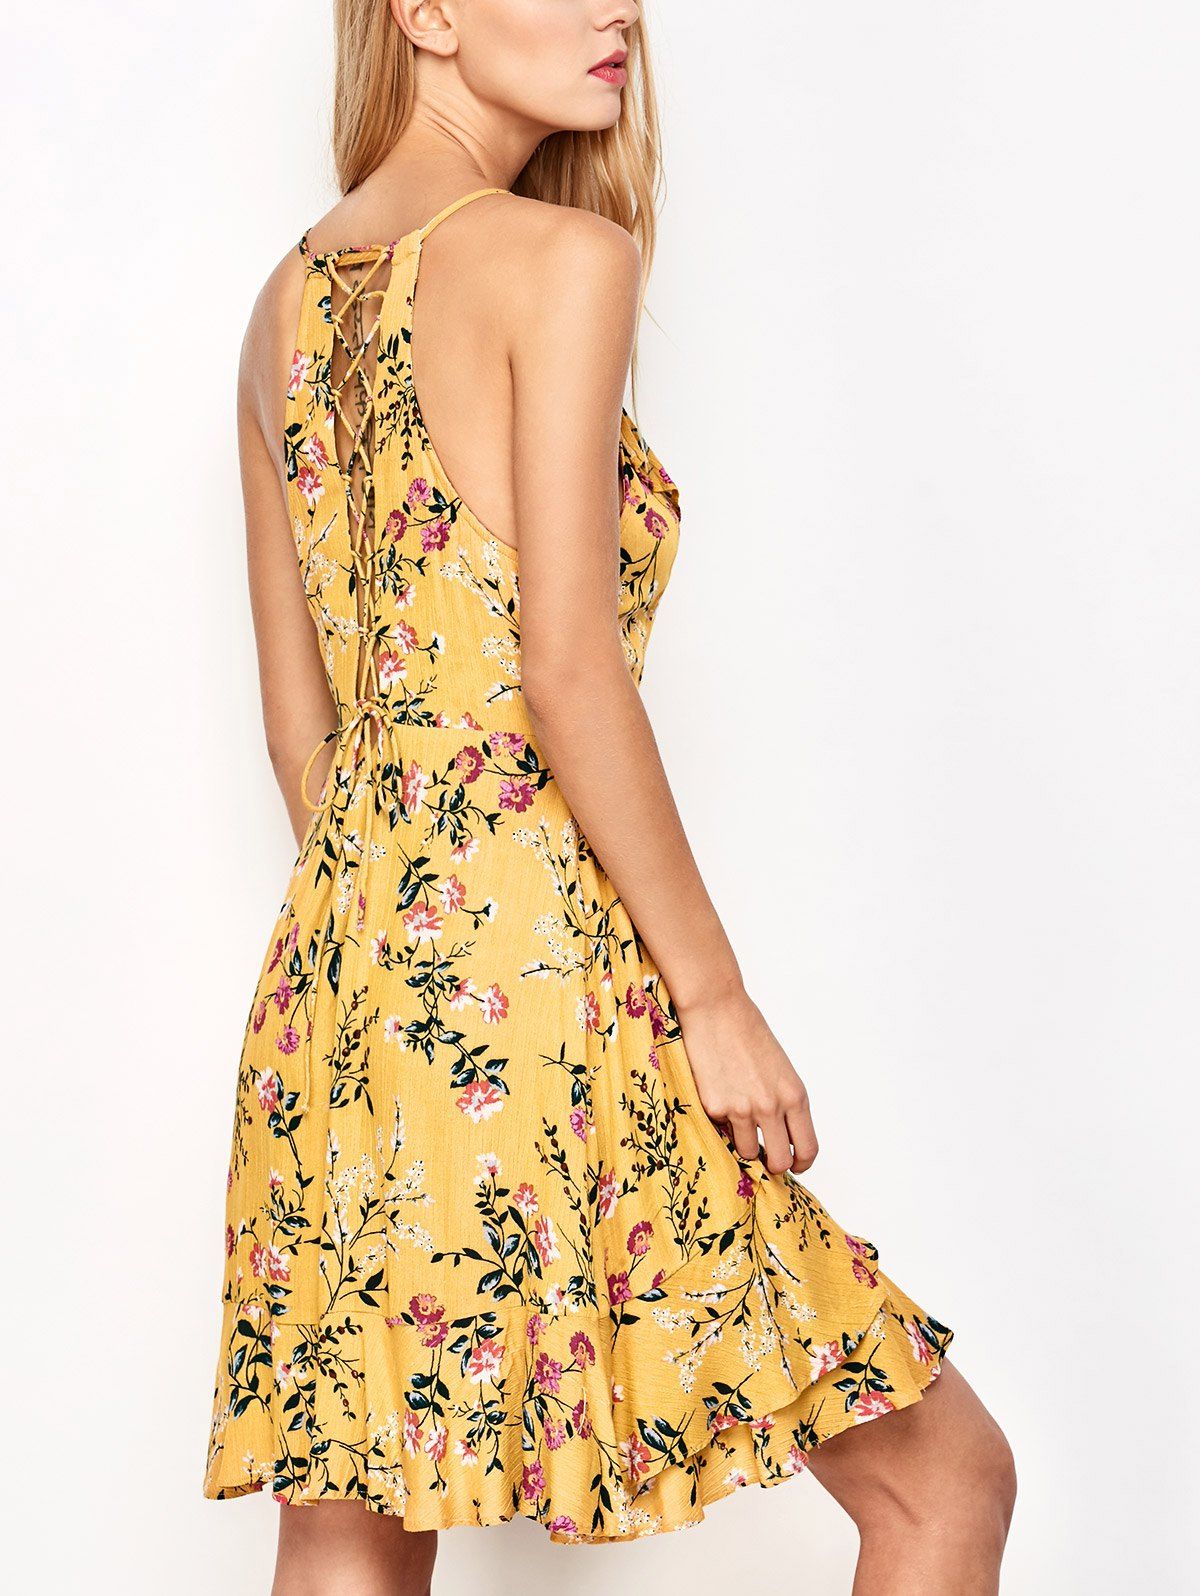 [41% OFF] 2021 Ruffled Cami Floral Skater Dress In YELLOW | DressLily